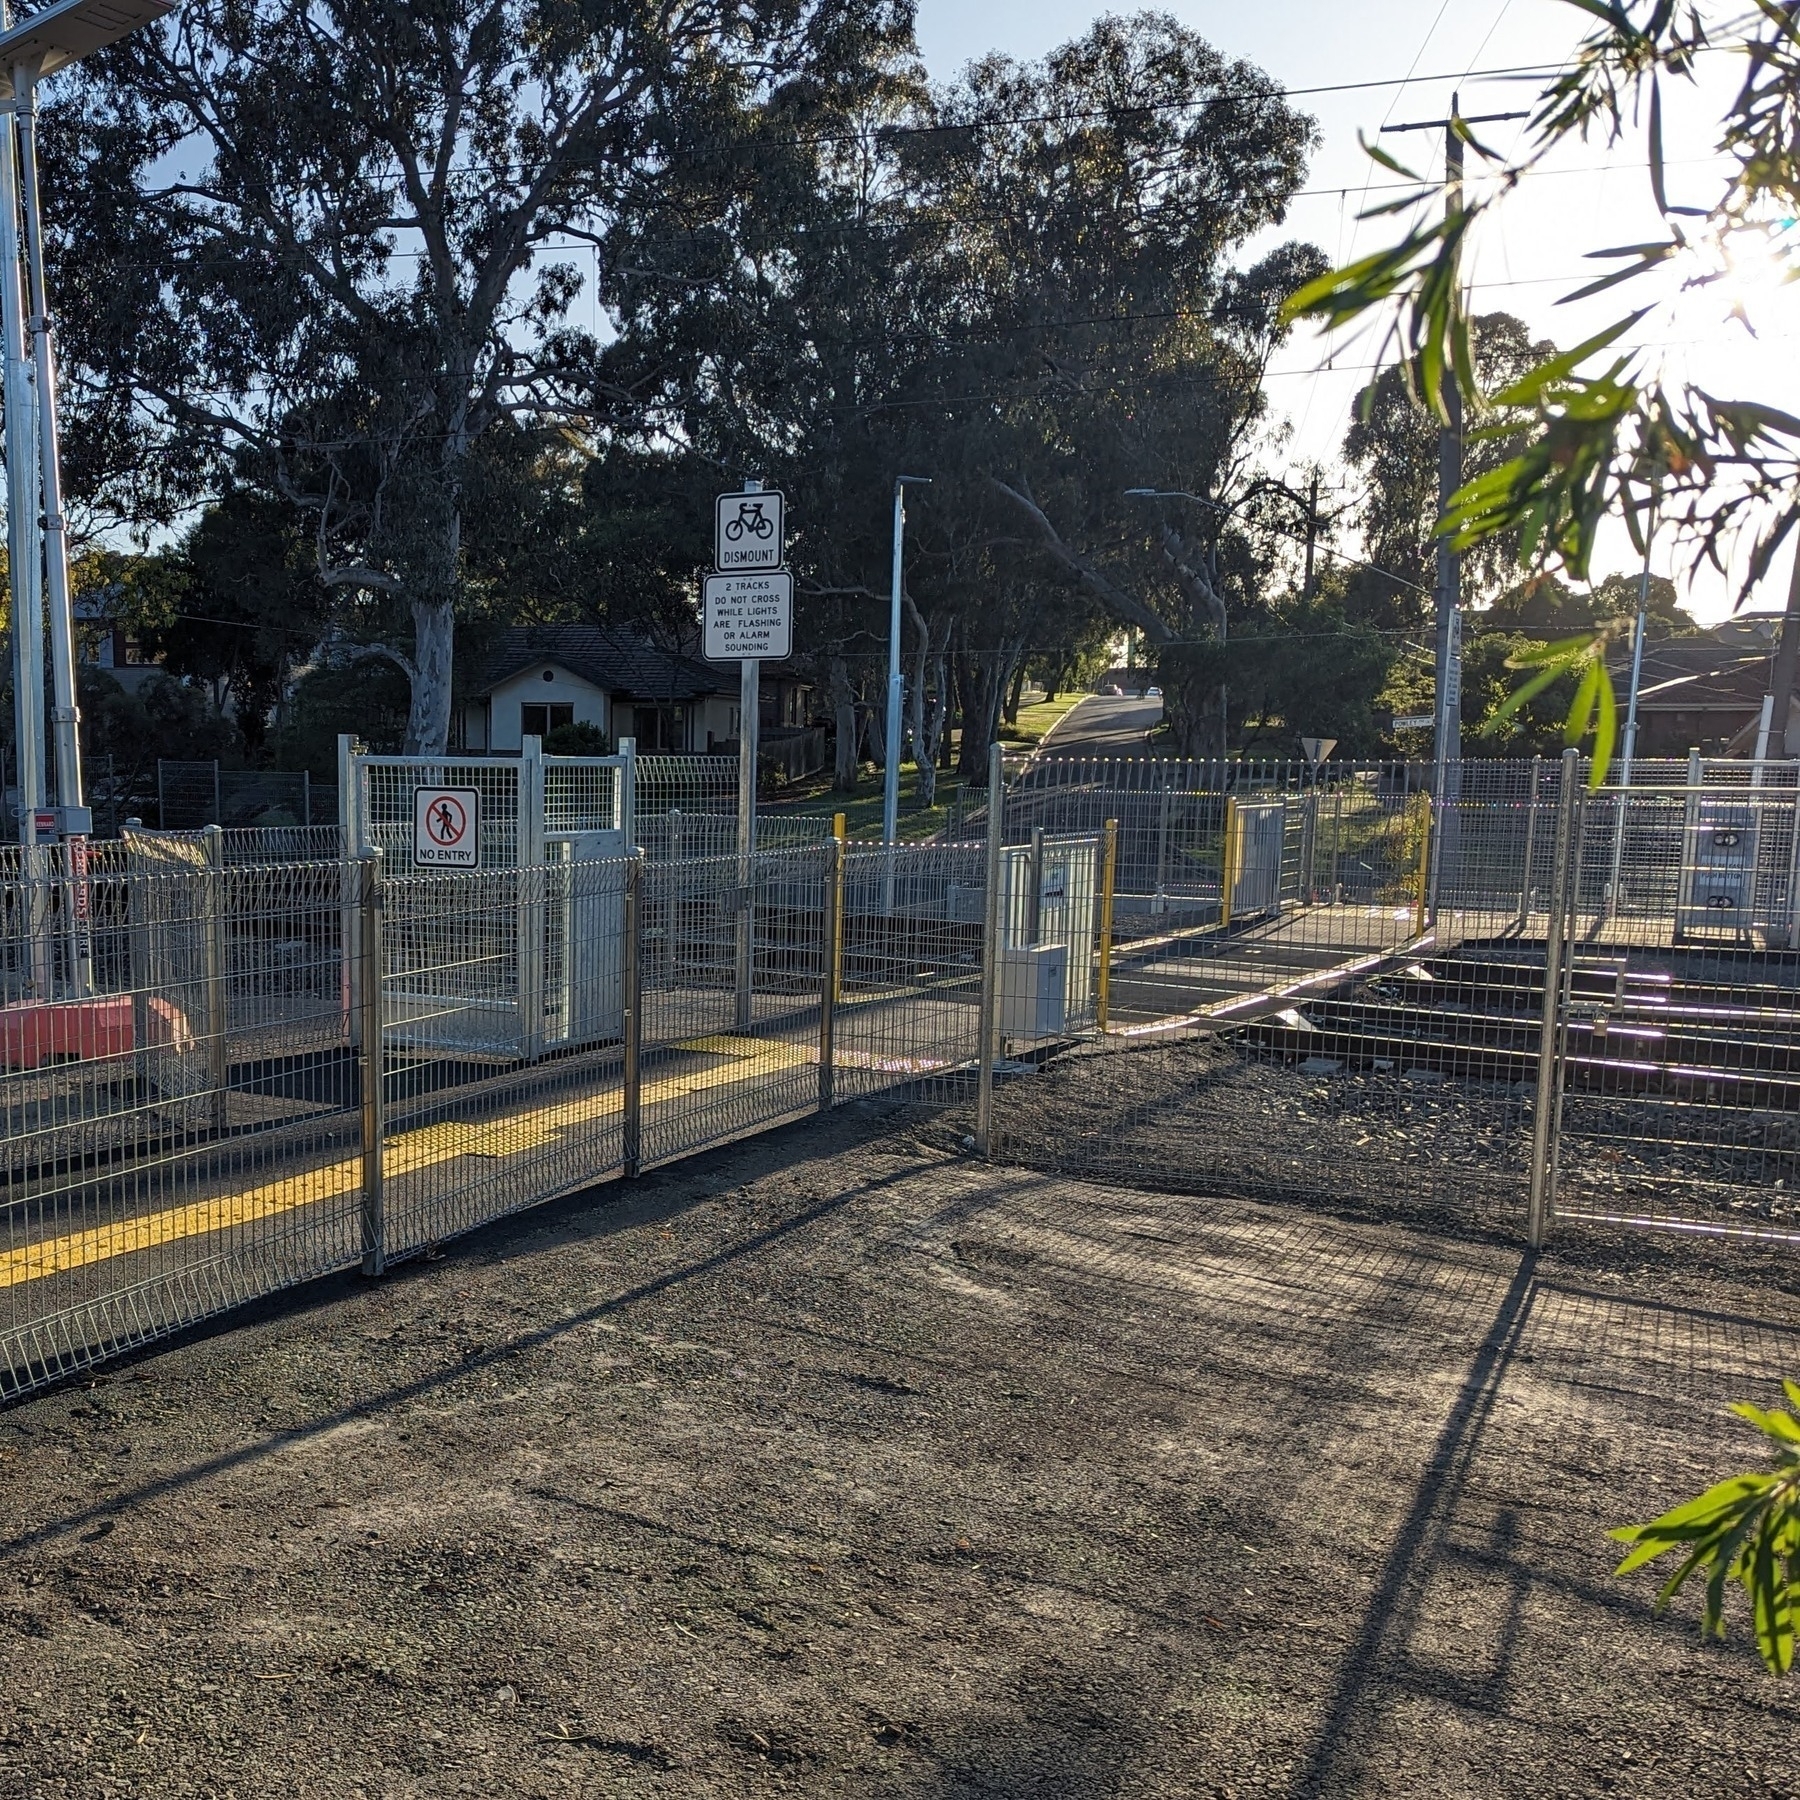 A pedesterian rail crossing with feces and automated gates that will close when a train passes by. This is backed by suburban streets and trees.